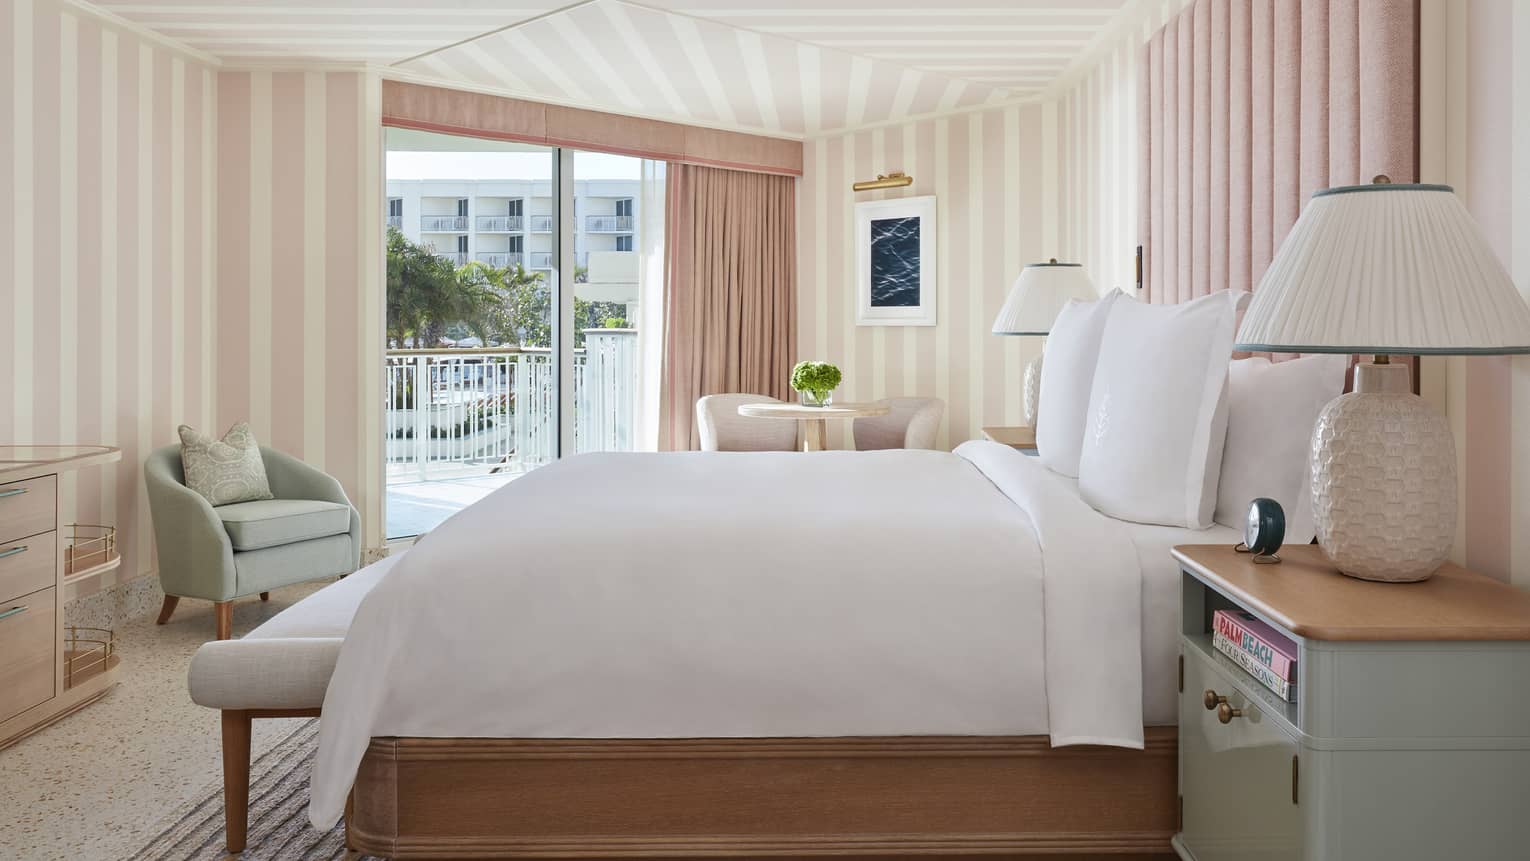 Ocean View Cabana Terrace Room hotel bed, lamp against pink and white walls